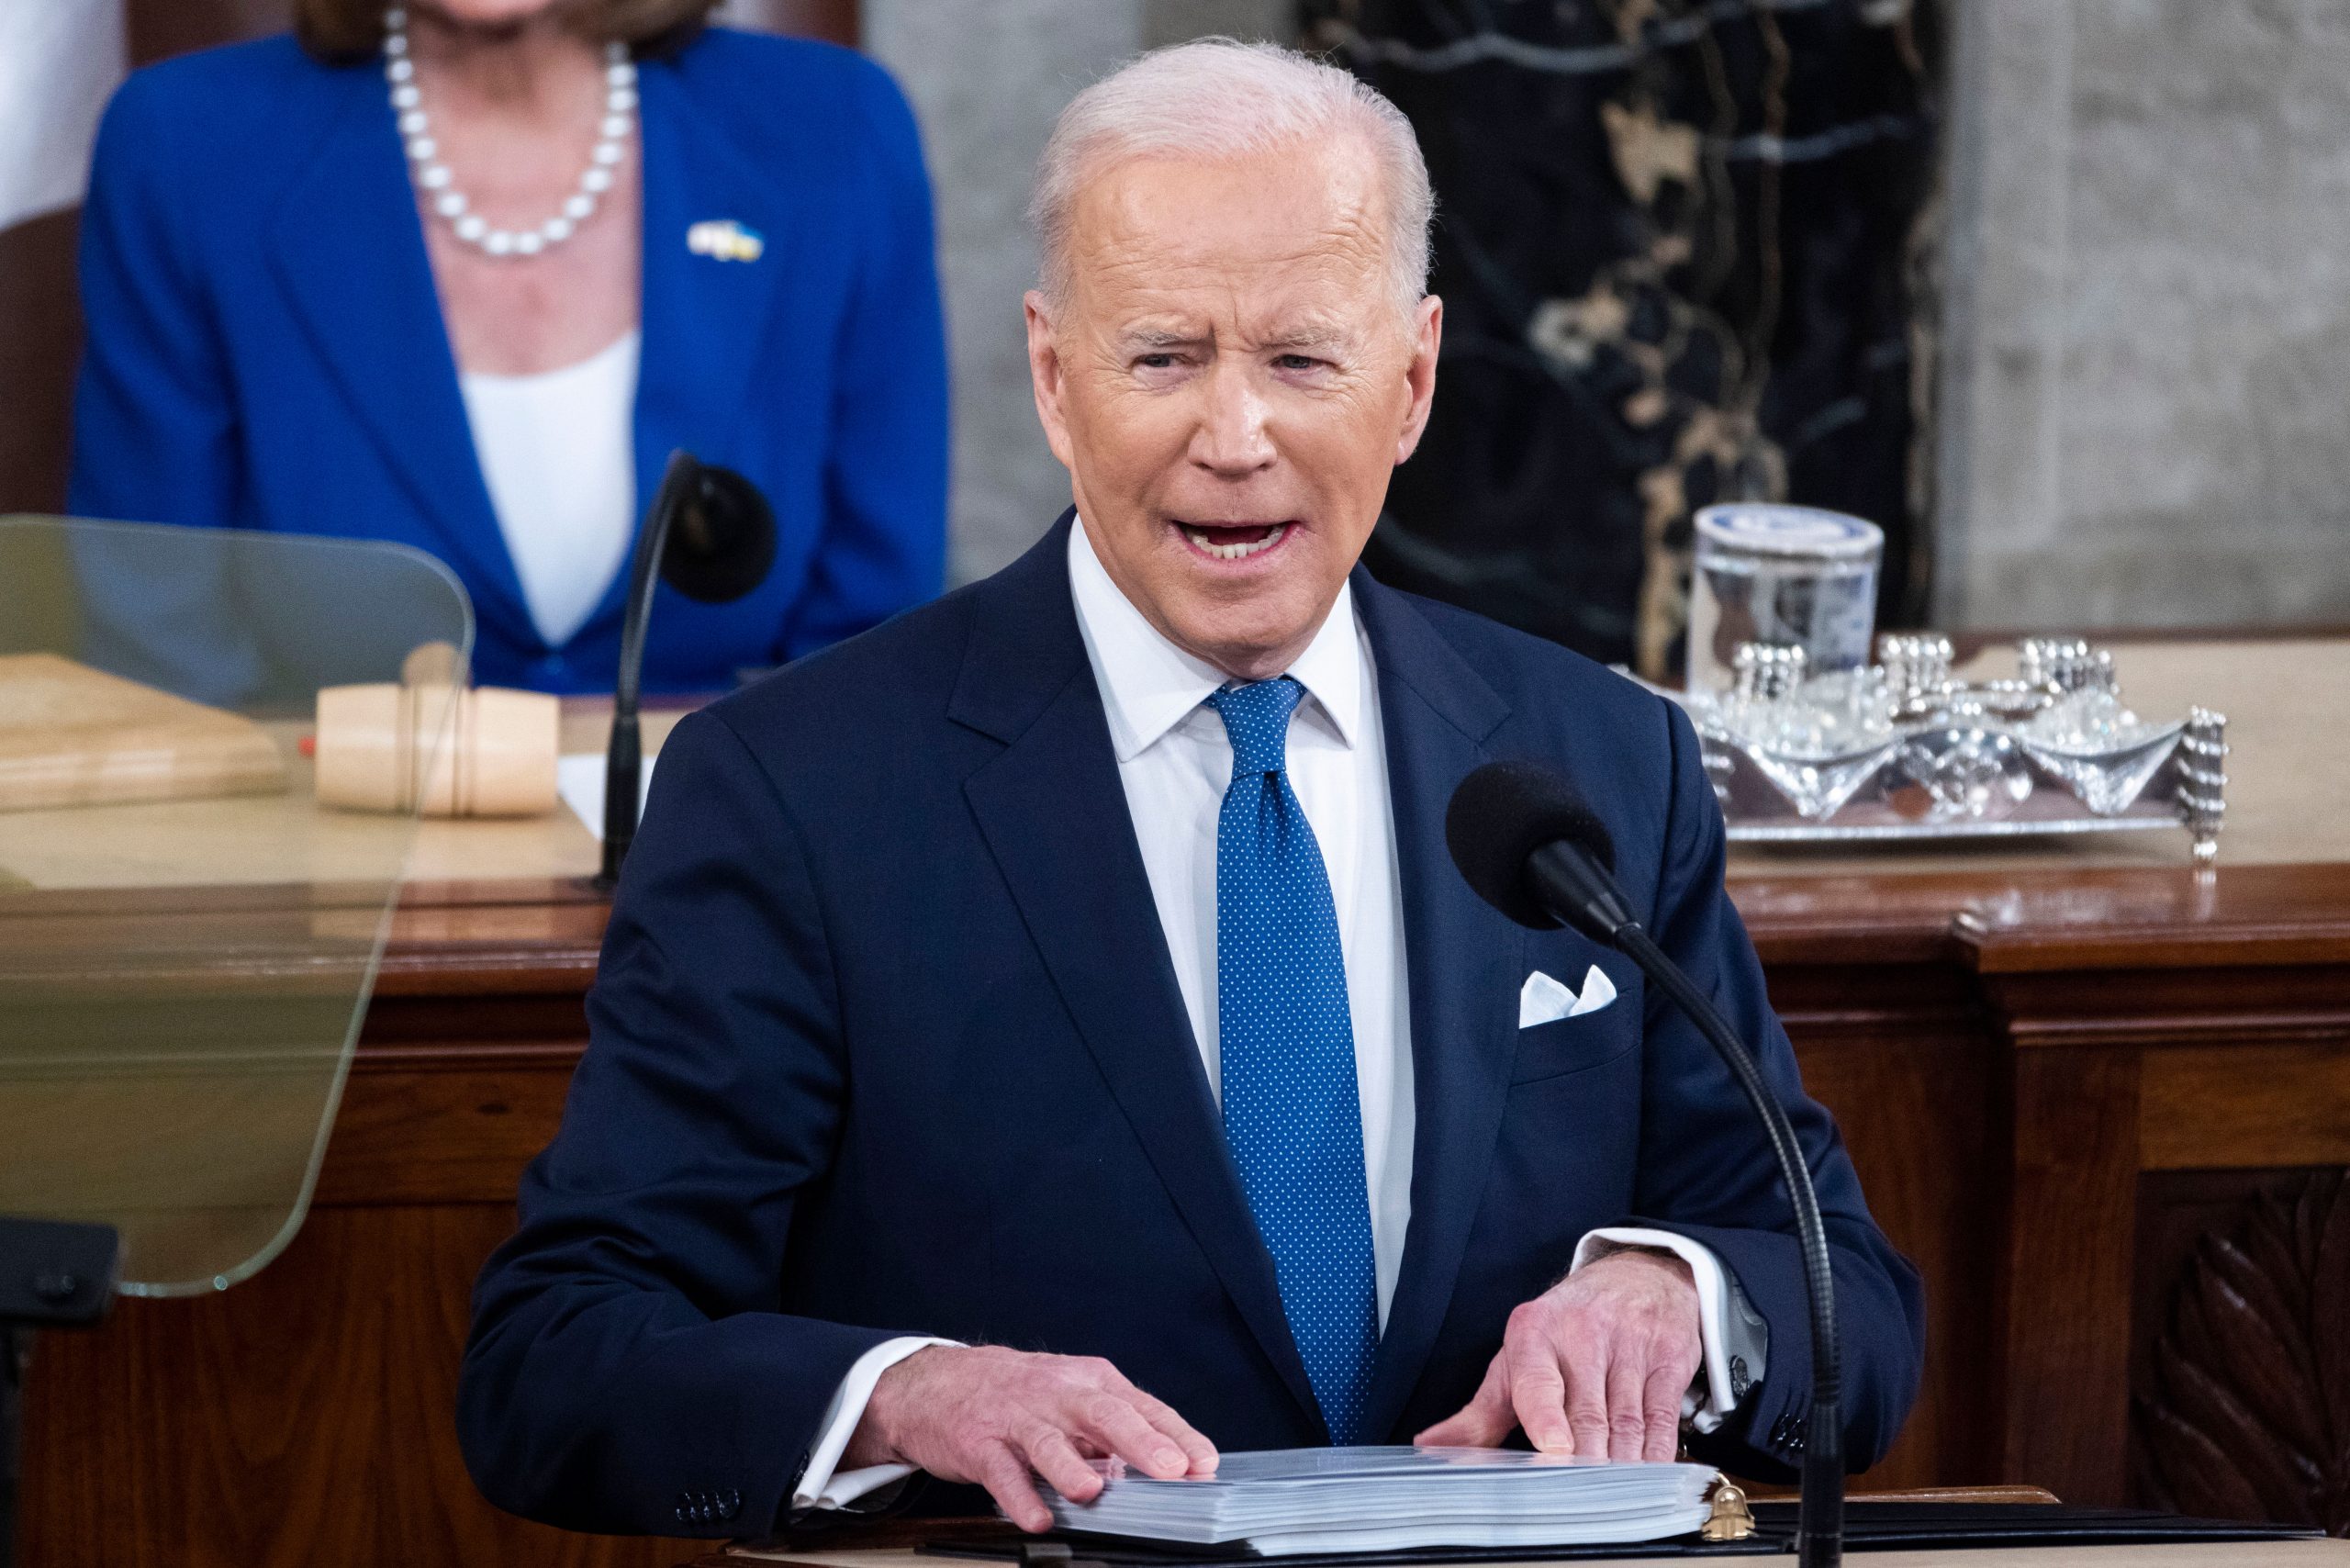 Fact Check: Joe Biden’s State of Union claims on guns, electric vehicles